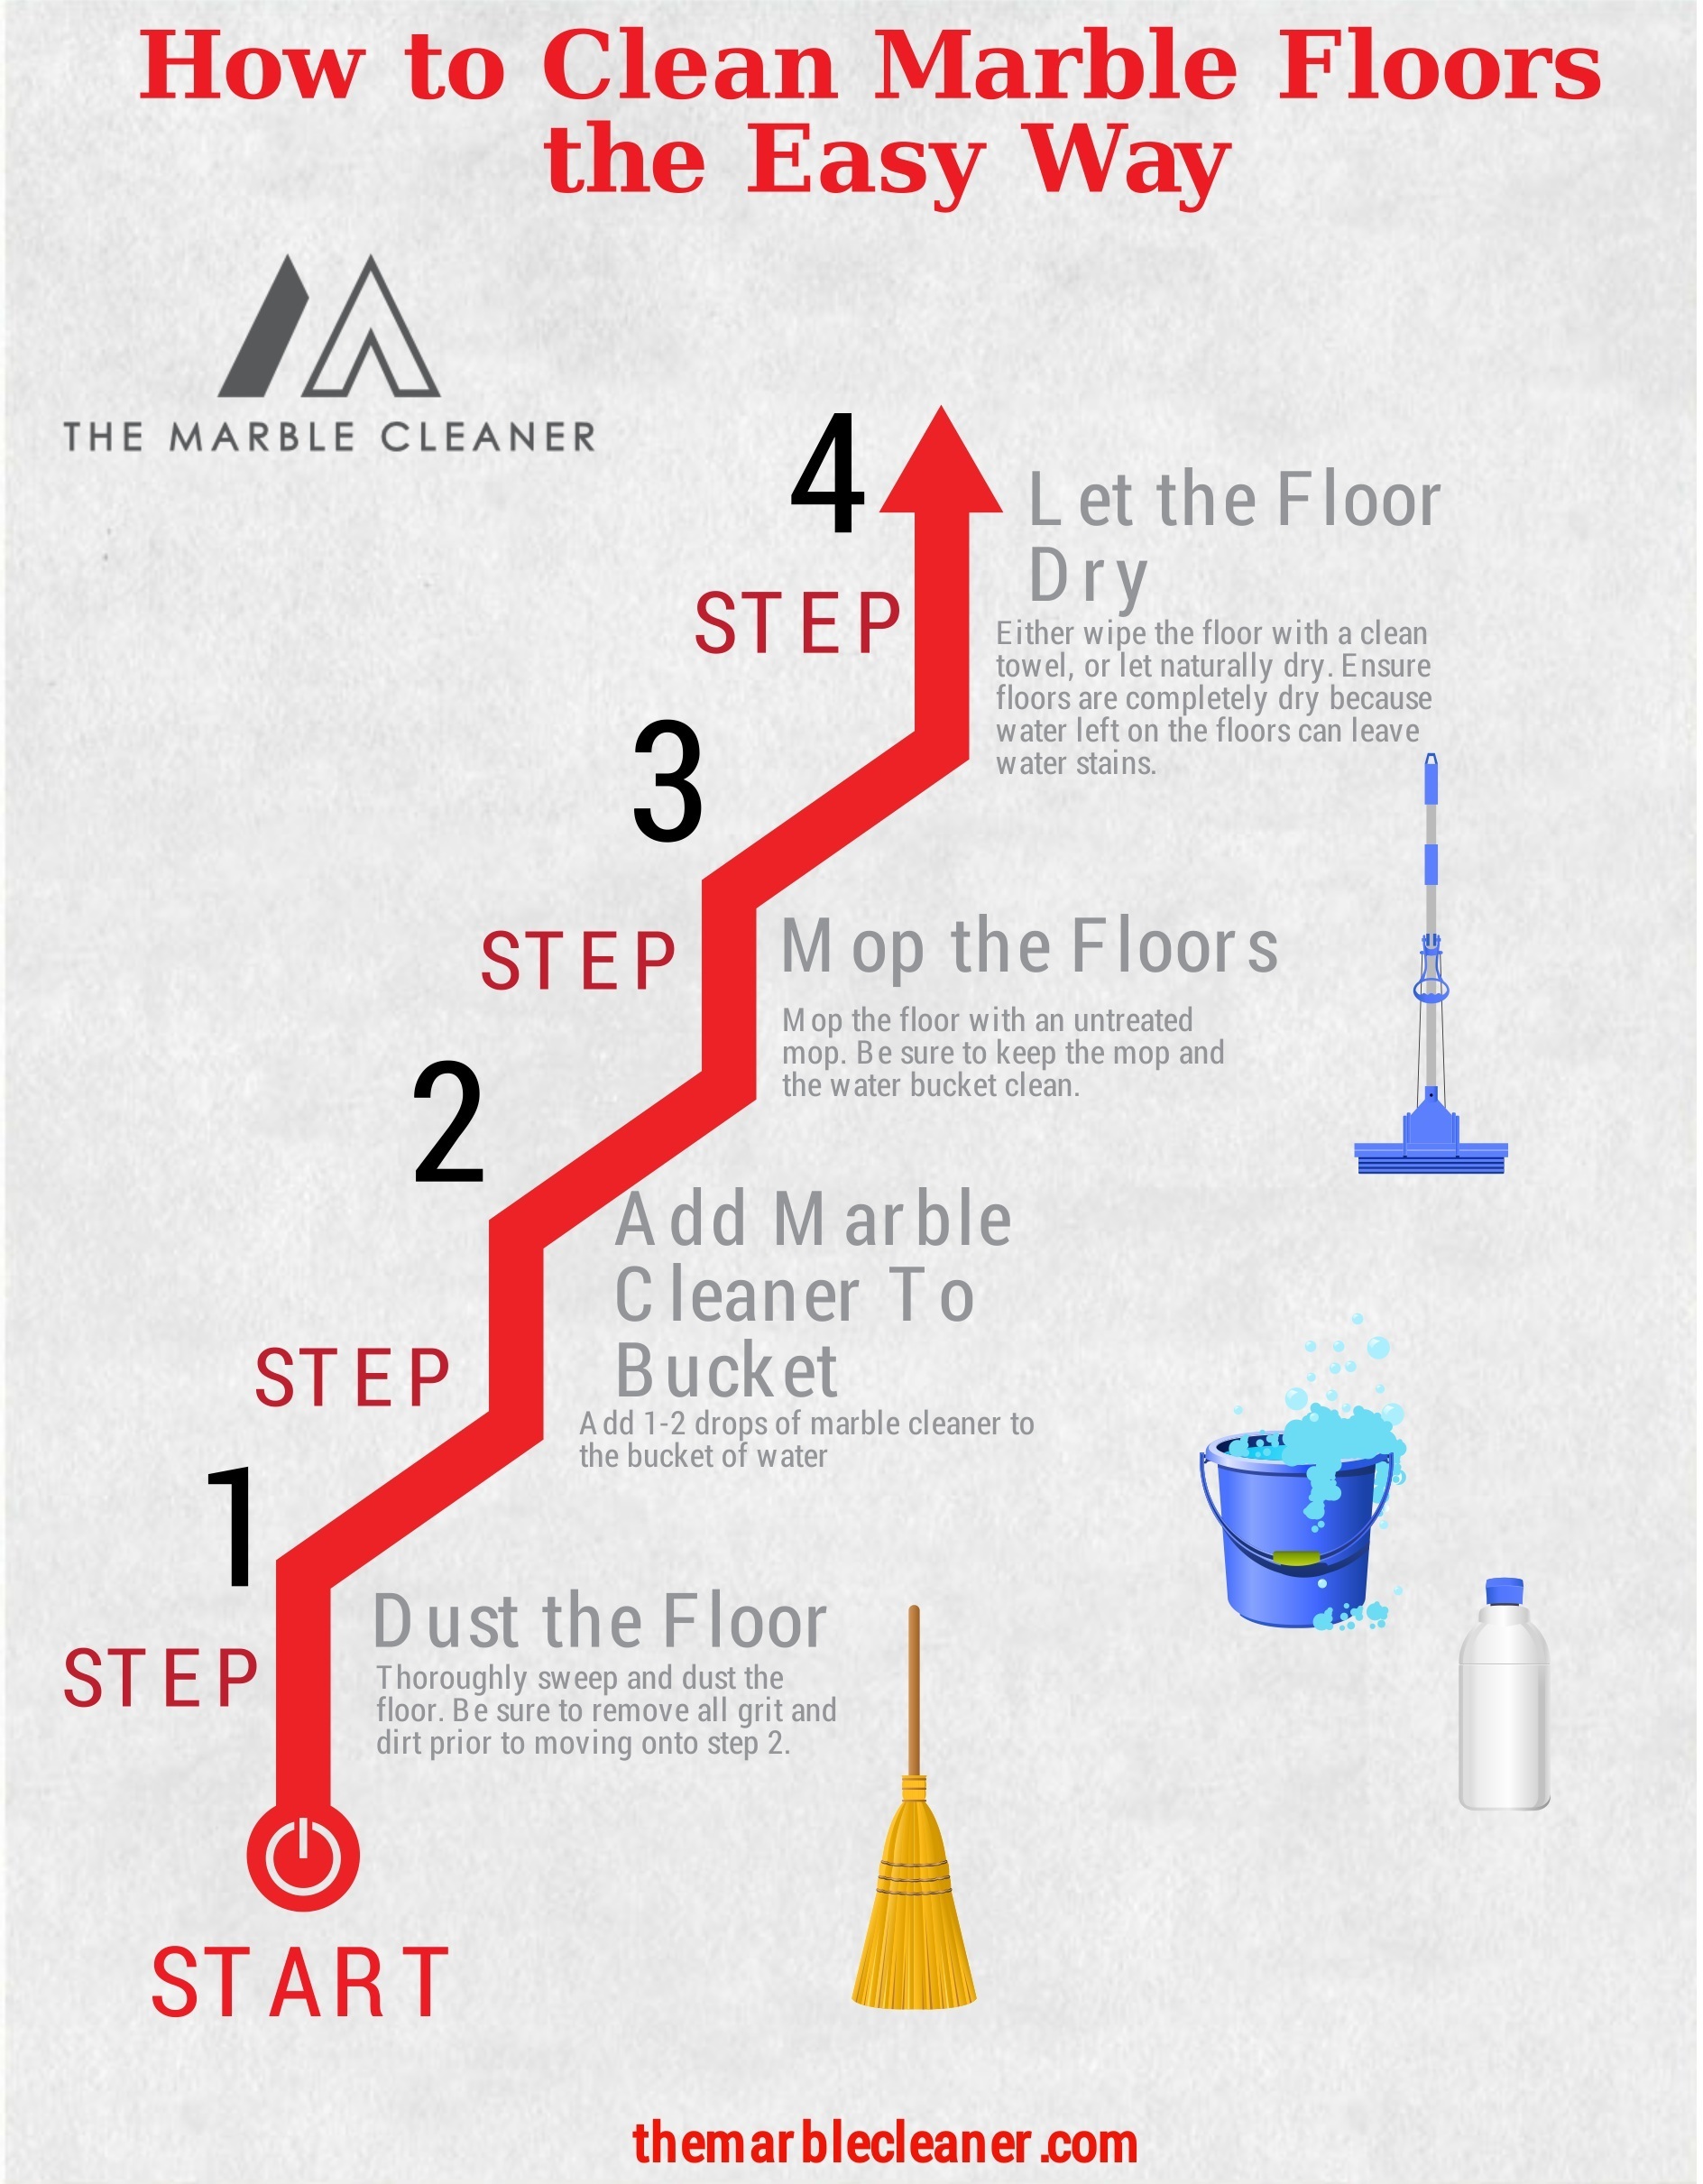 How To Clean Marble Floors the Easy Way – The Marble Cleaner